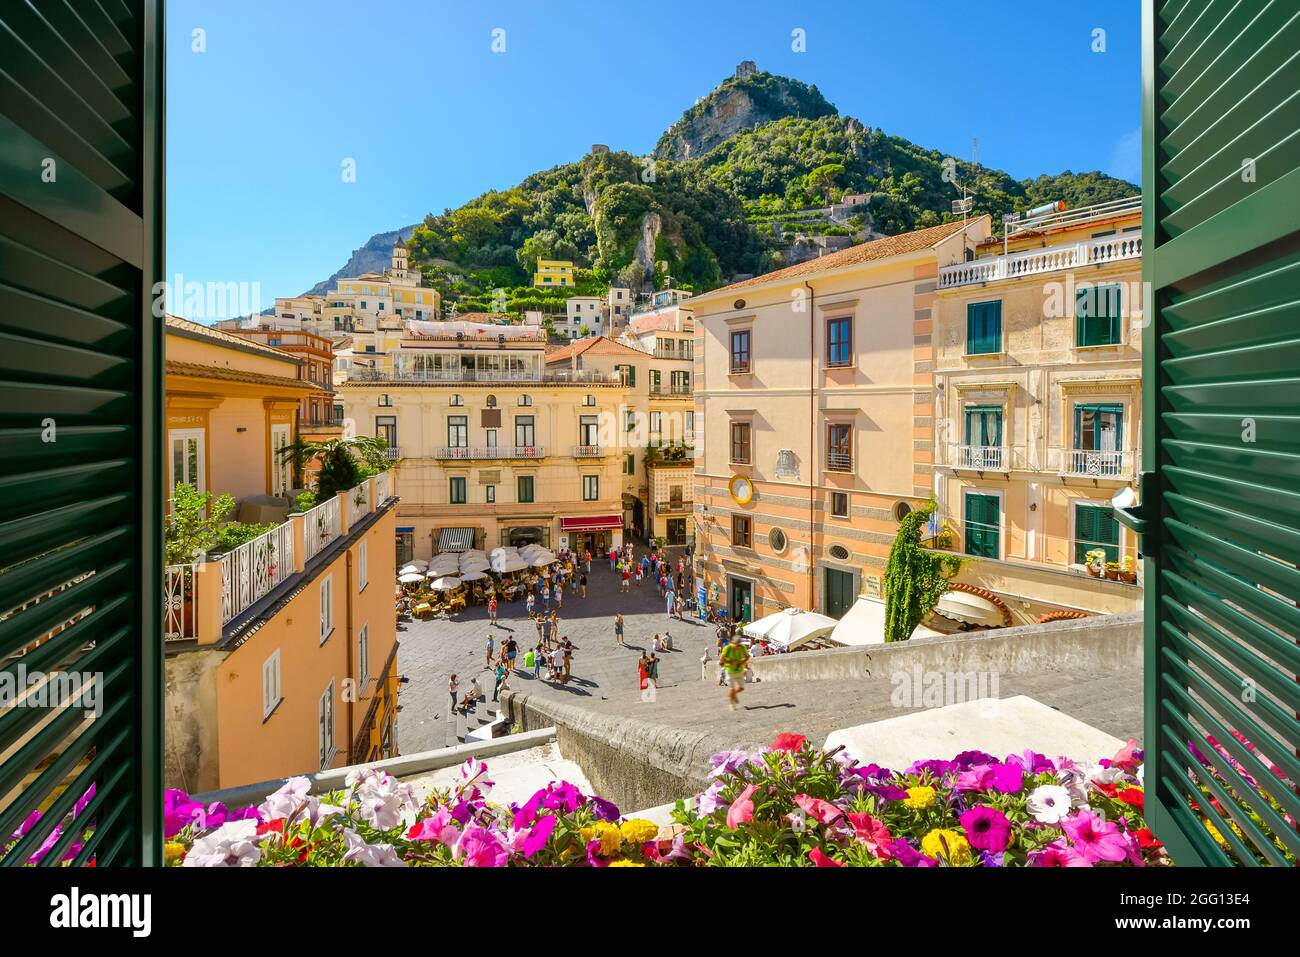 View from an open window with shutters over the steps, Piazza Duomo, and colorful old town of Amalfi, Italy, on the Amalfi Coast. Stock Photo